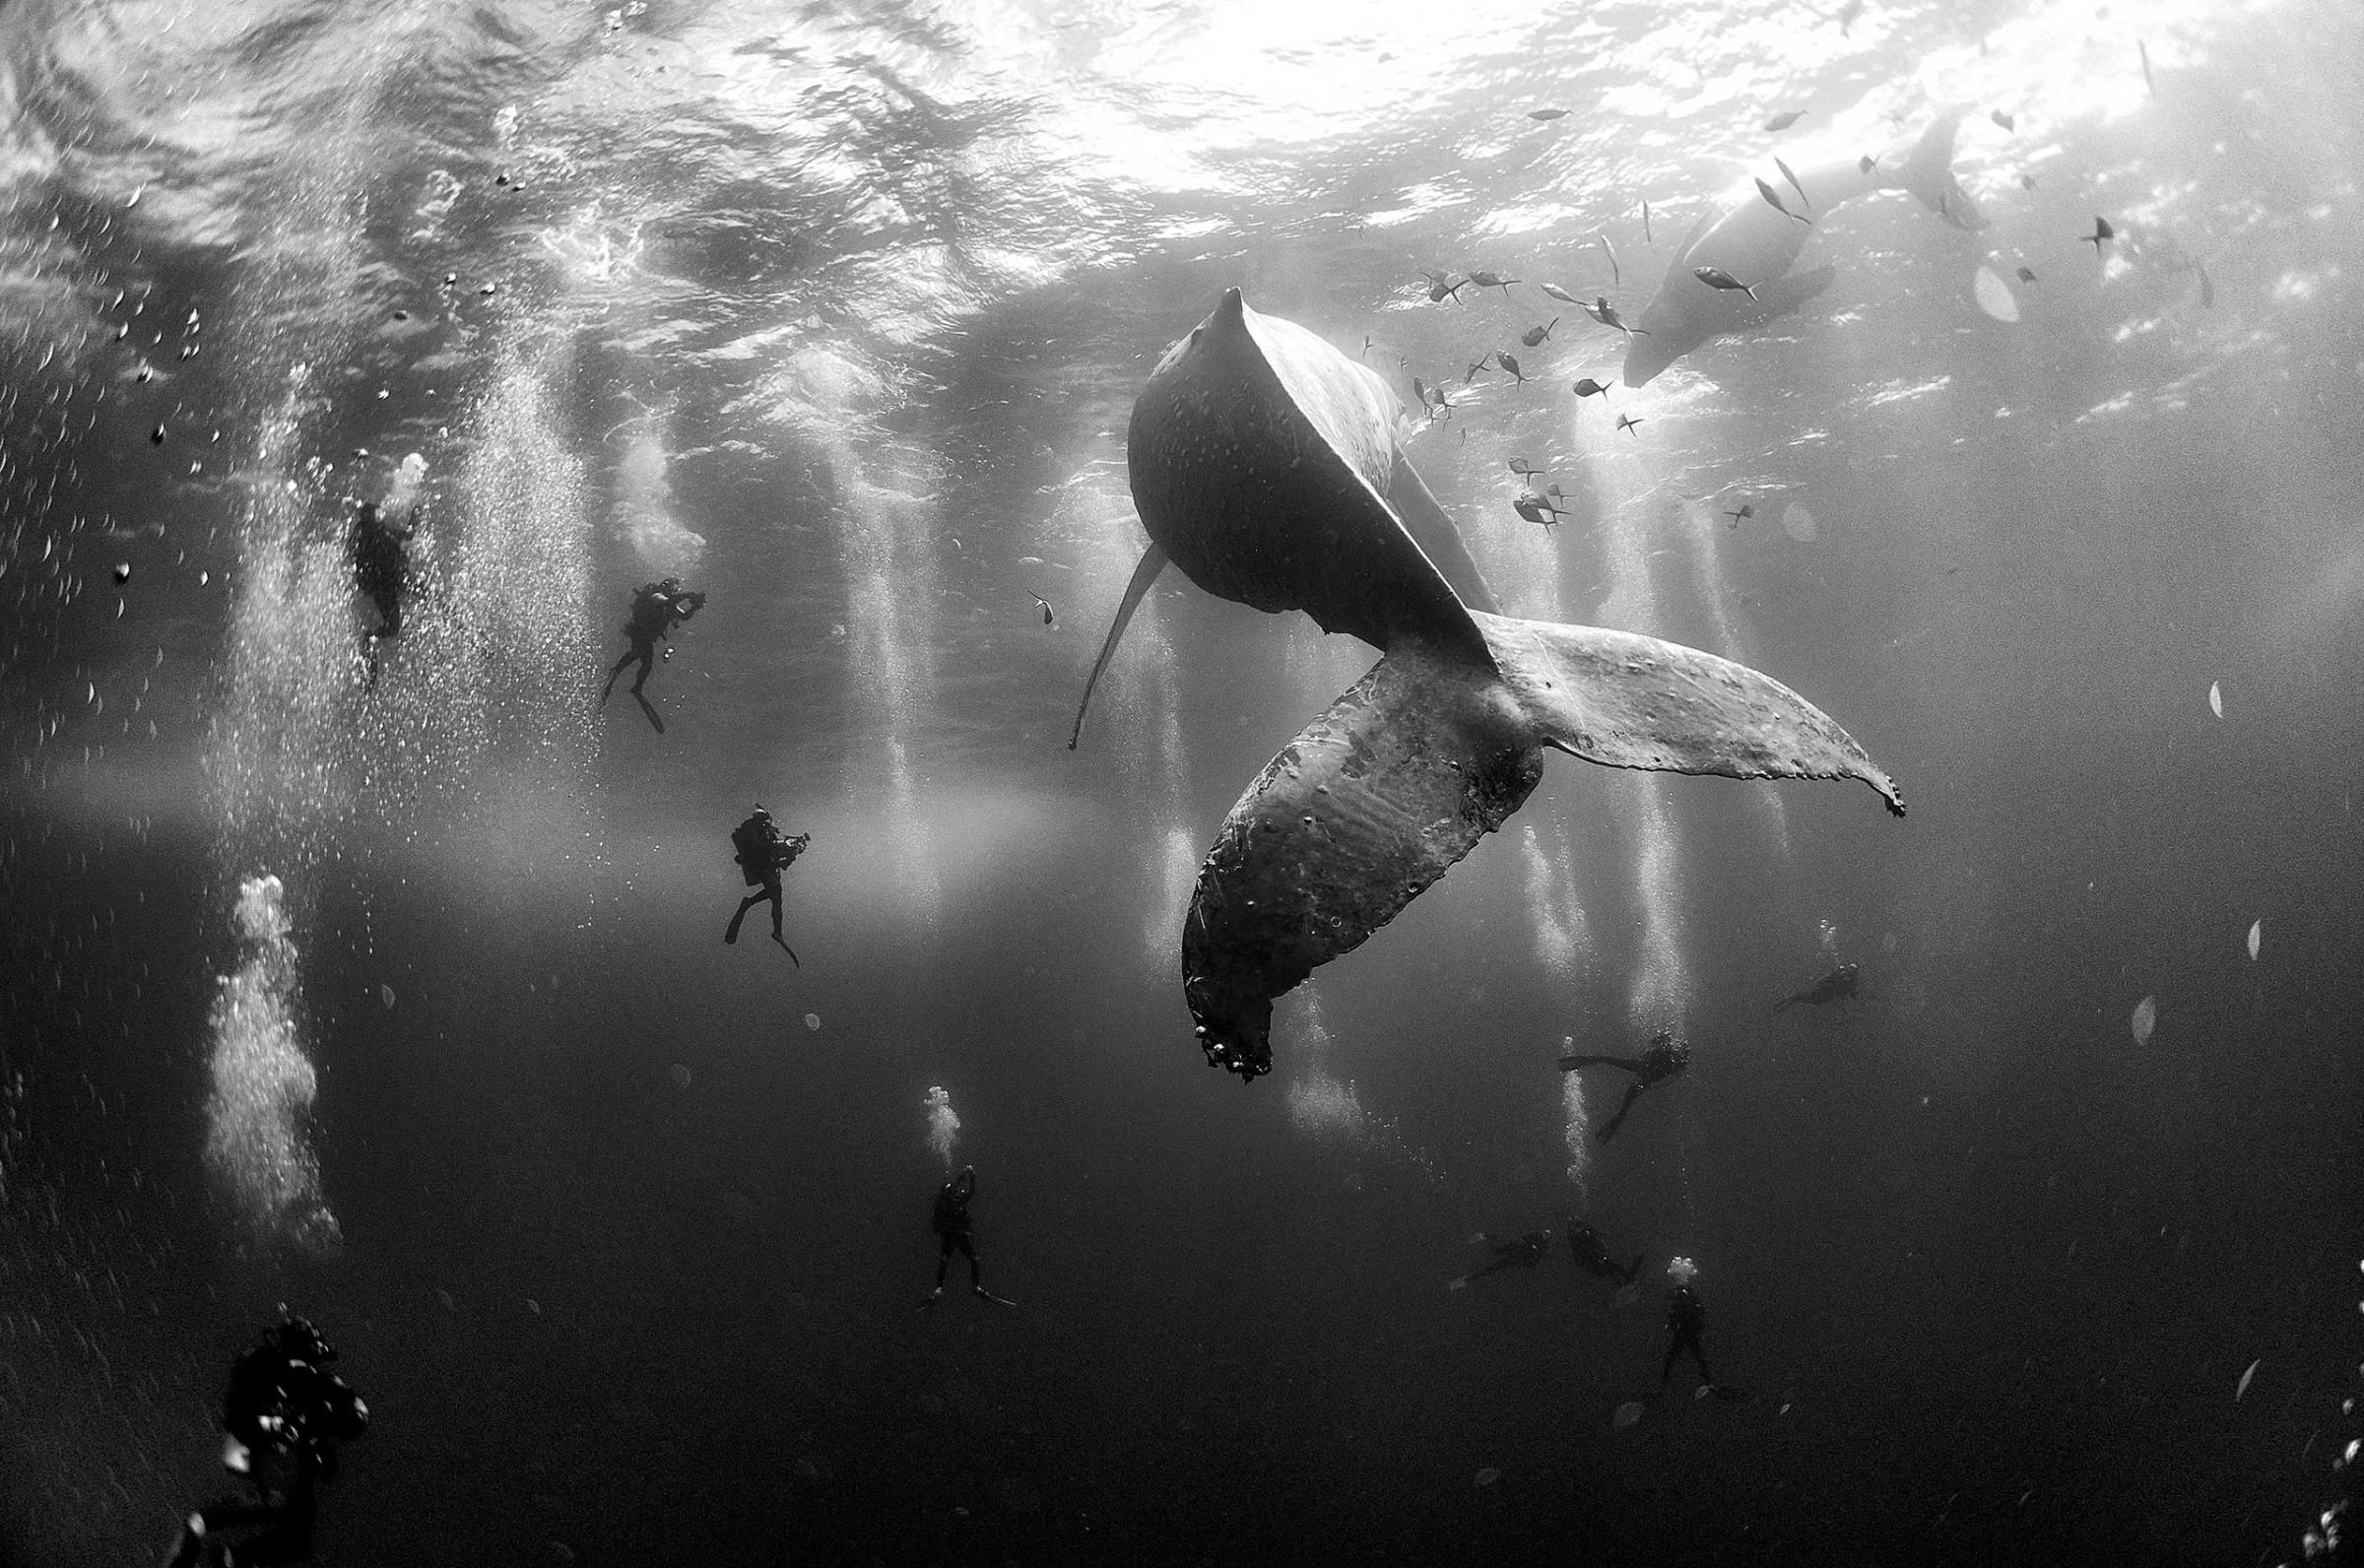 Nature, 2nd prize singles. Divers observe and surround a humpback whale and her newborn calf whilst they swim around Roca Partida in the Revillagigedo Islands, Mexico, Jan. 28, 2015.